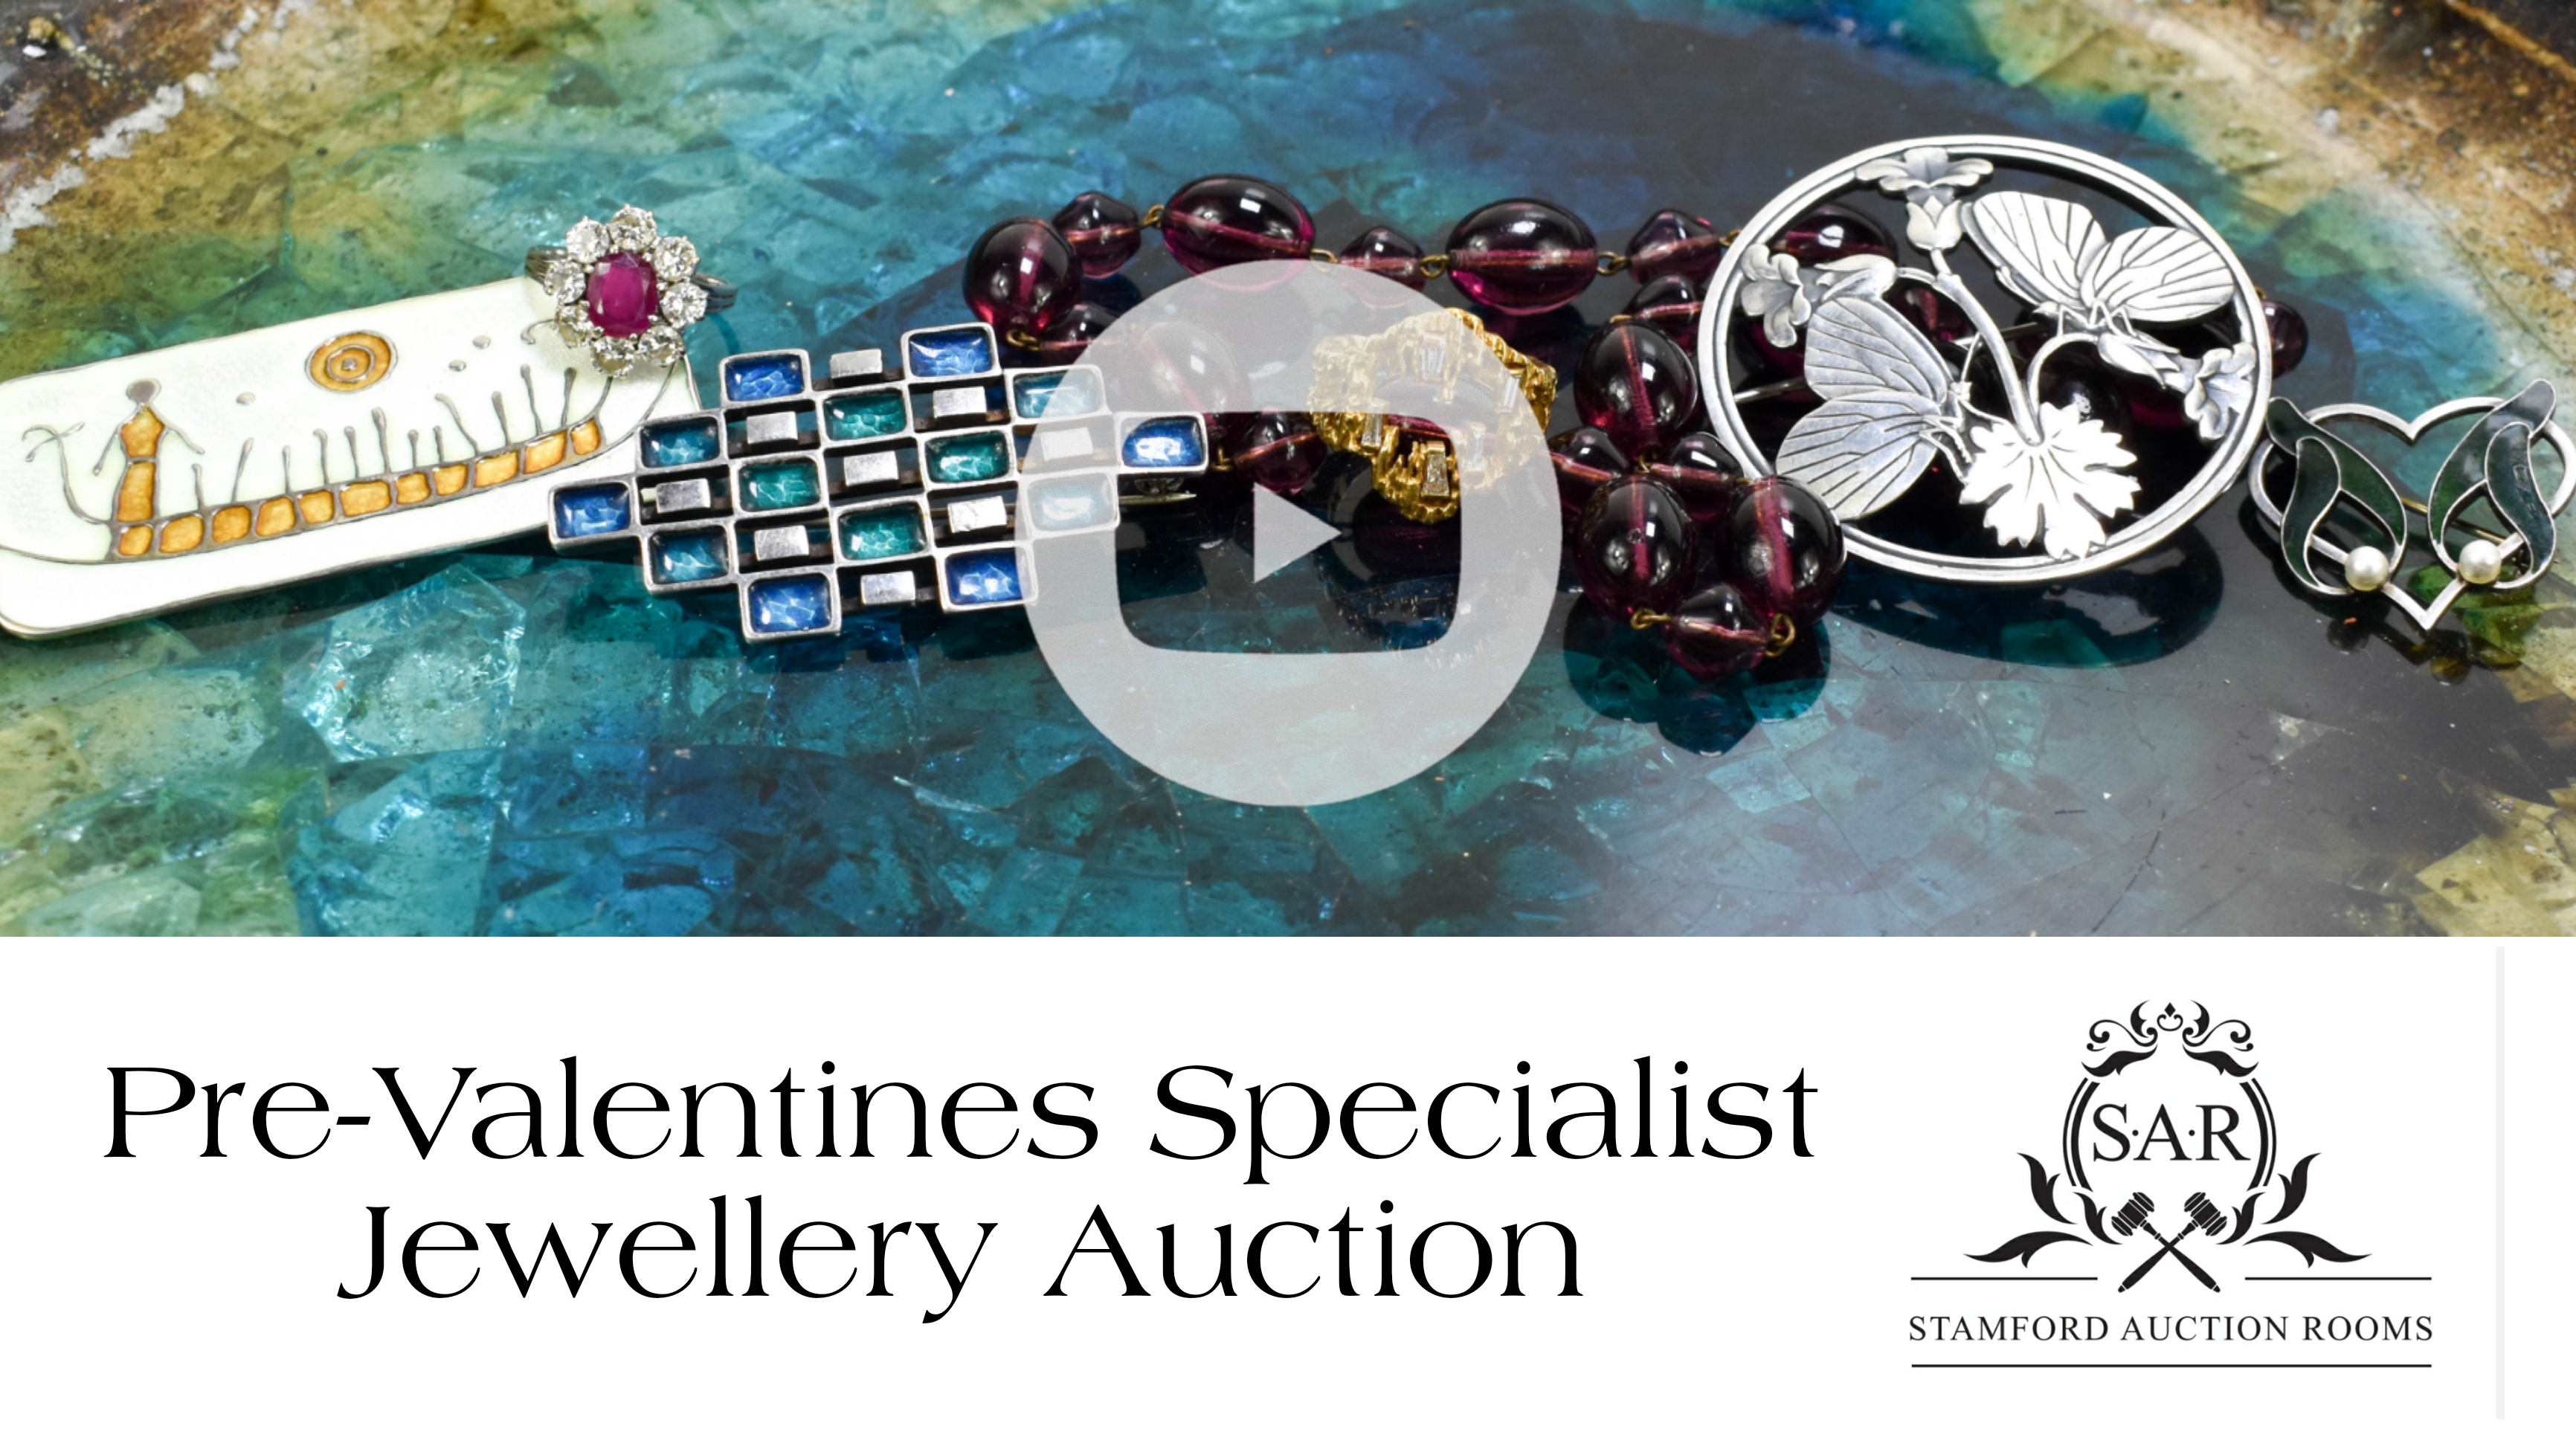 Pre-Valentines Day Specialist Jewellery Auction